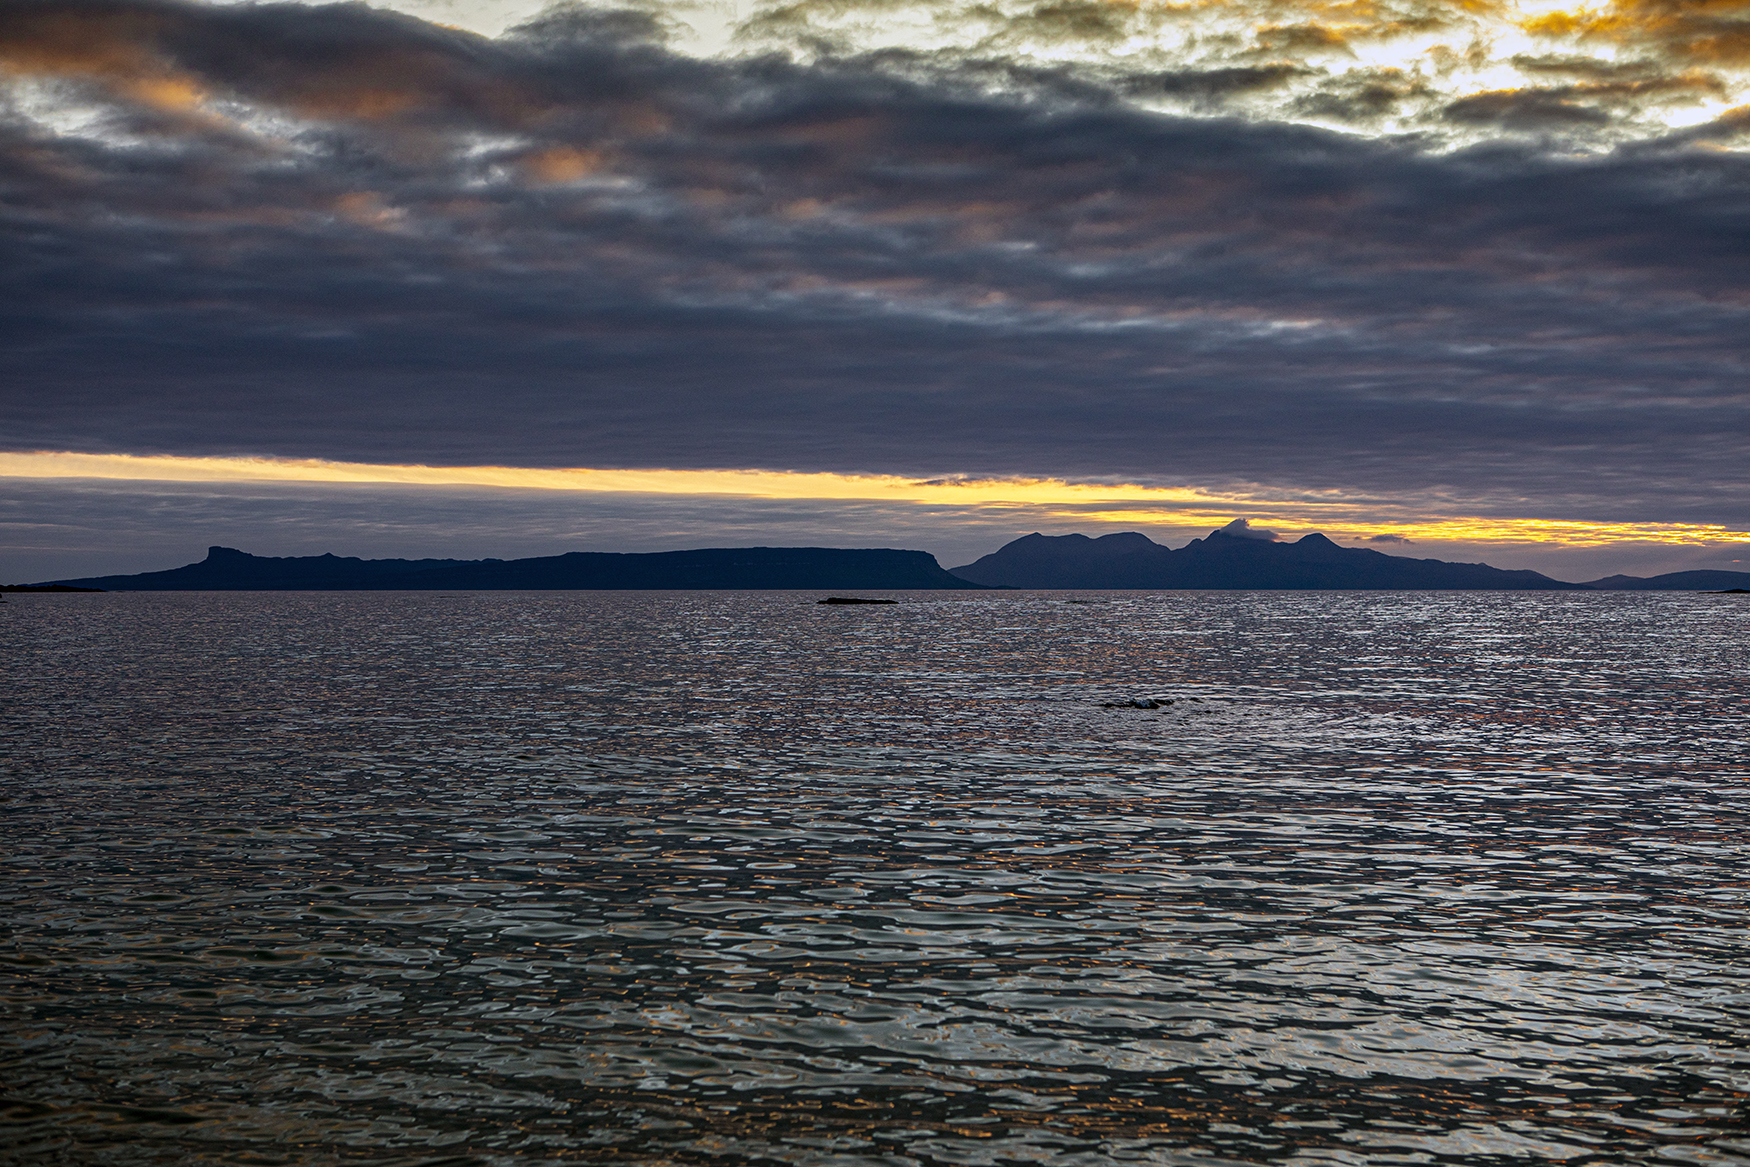 Sunset over the Small Isles.